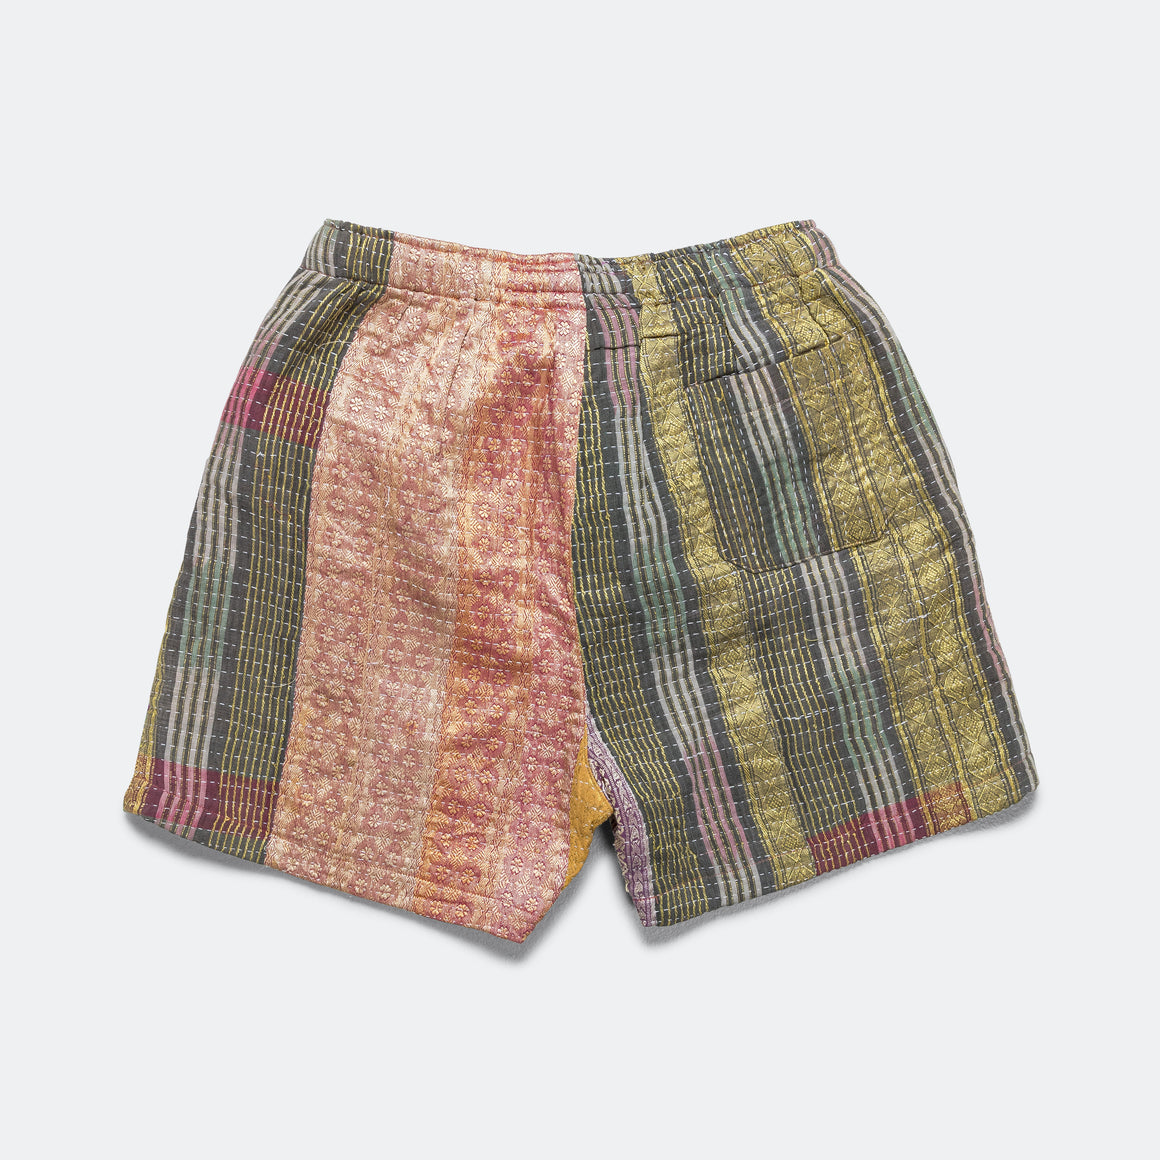 Kartik Research - One Of One Vintage Kantha Shorts - 36" - UP THERE